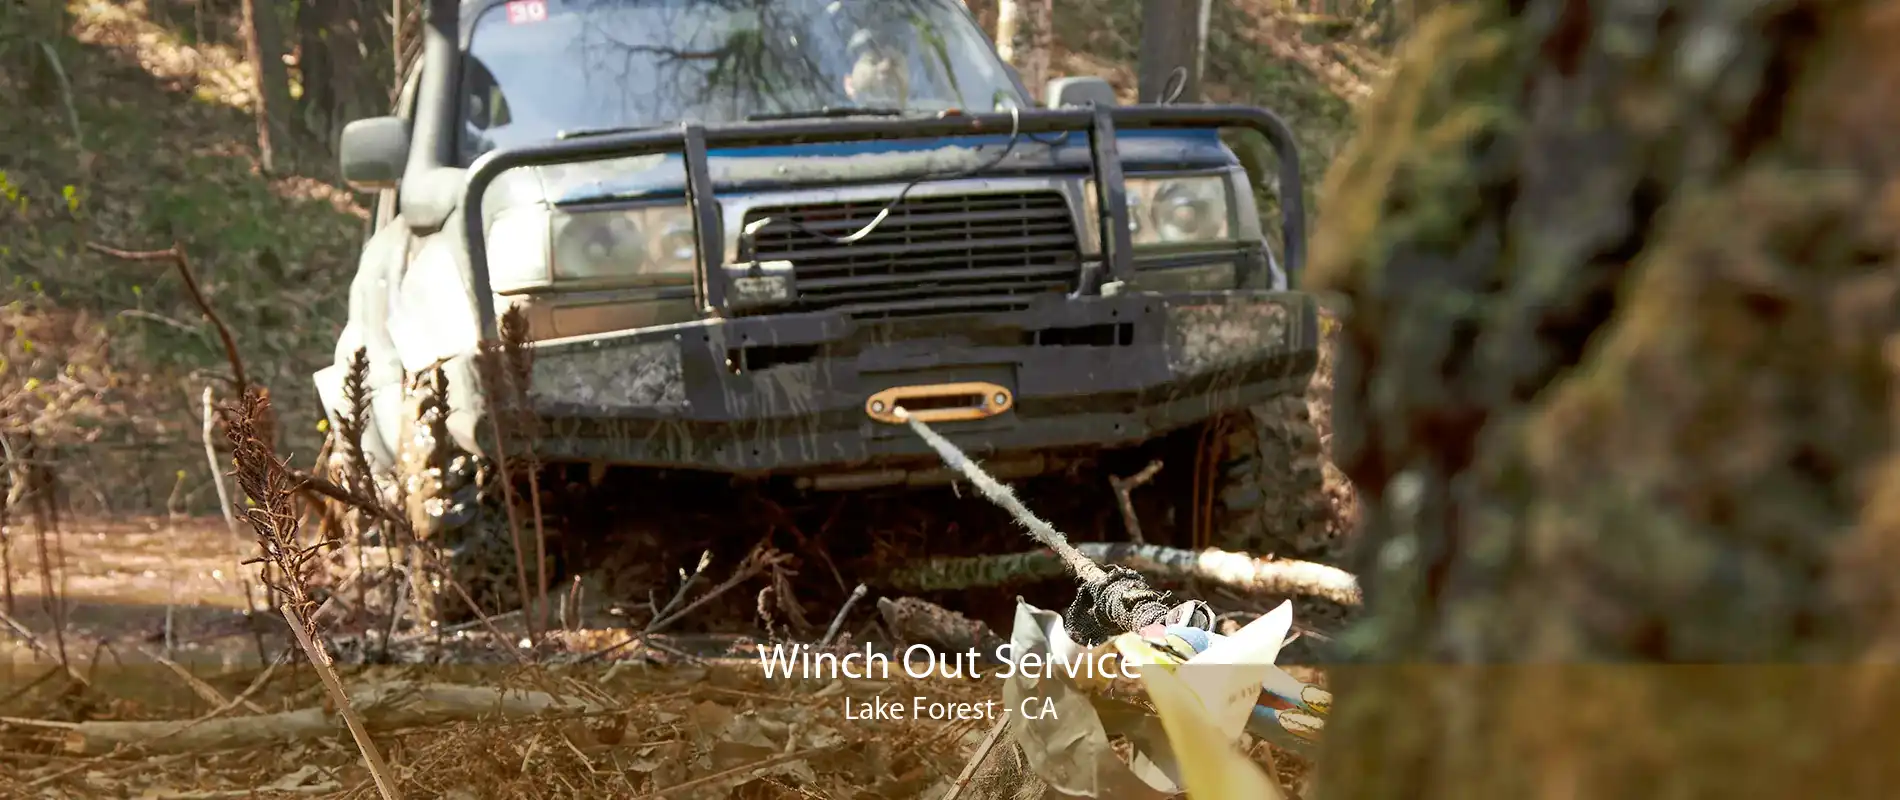 Winch Out Service Lake Forest - CA